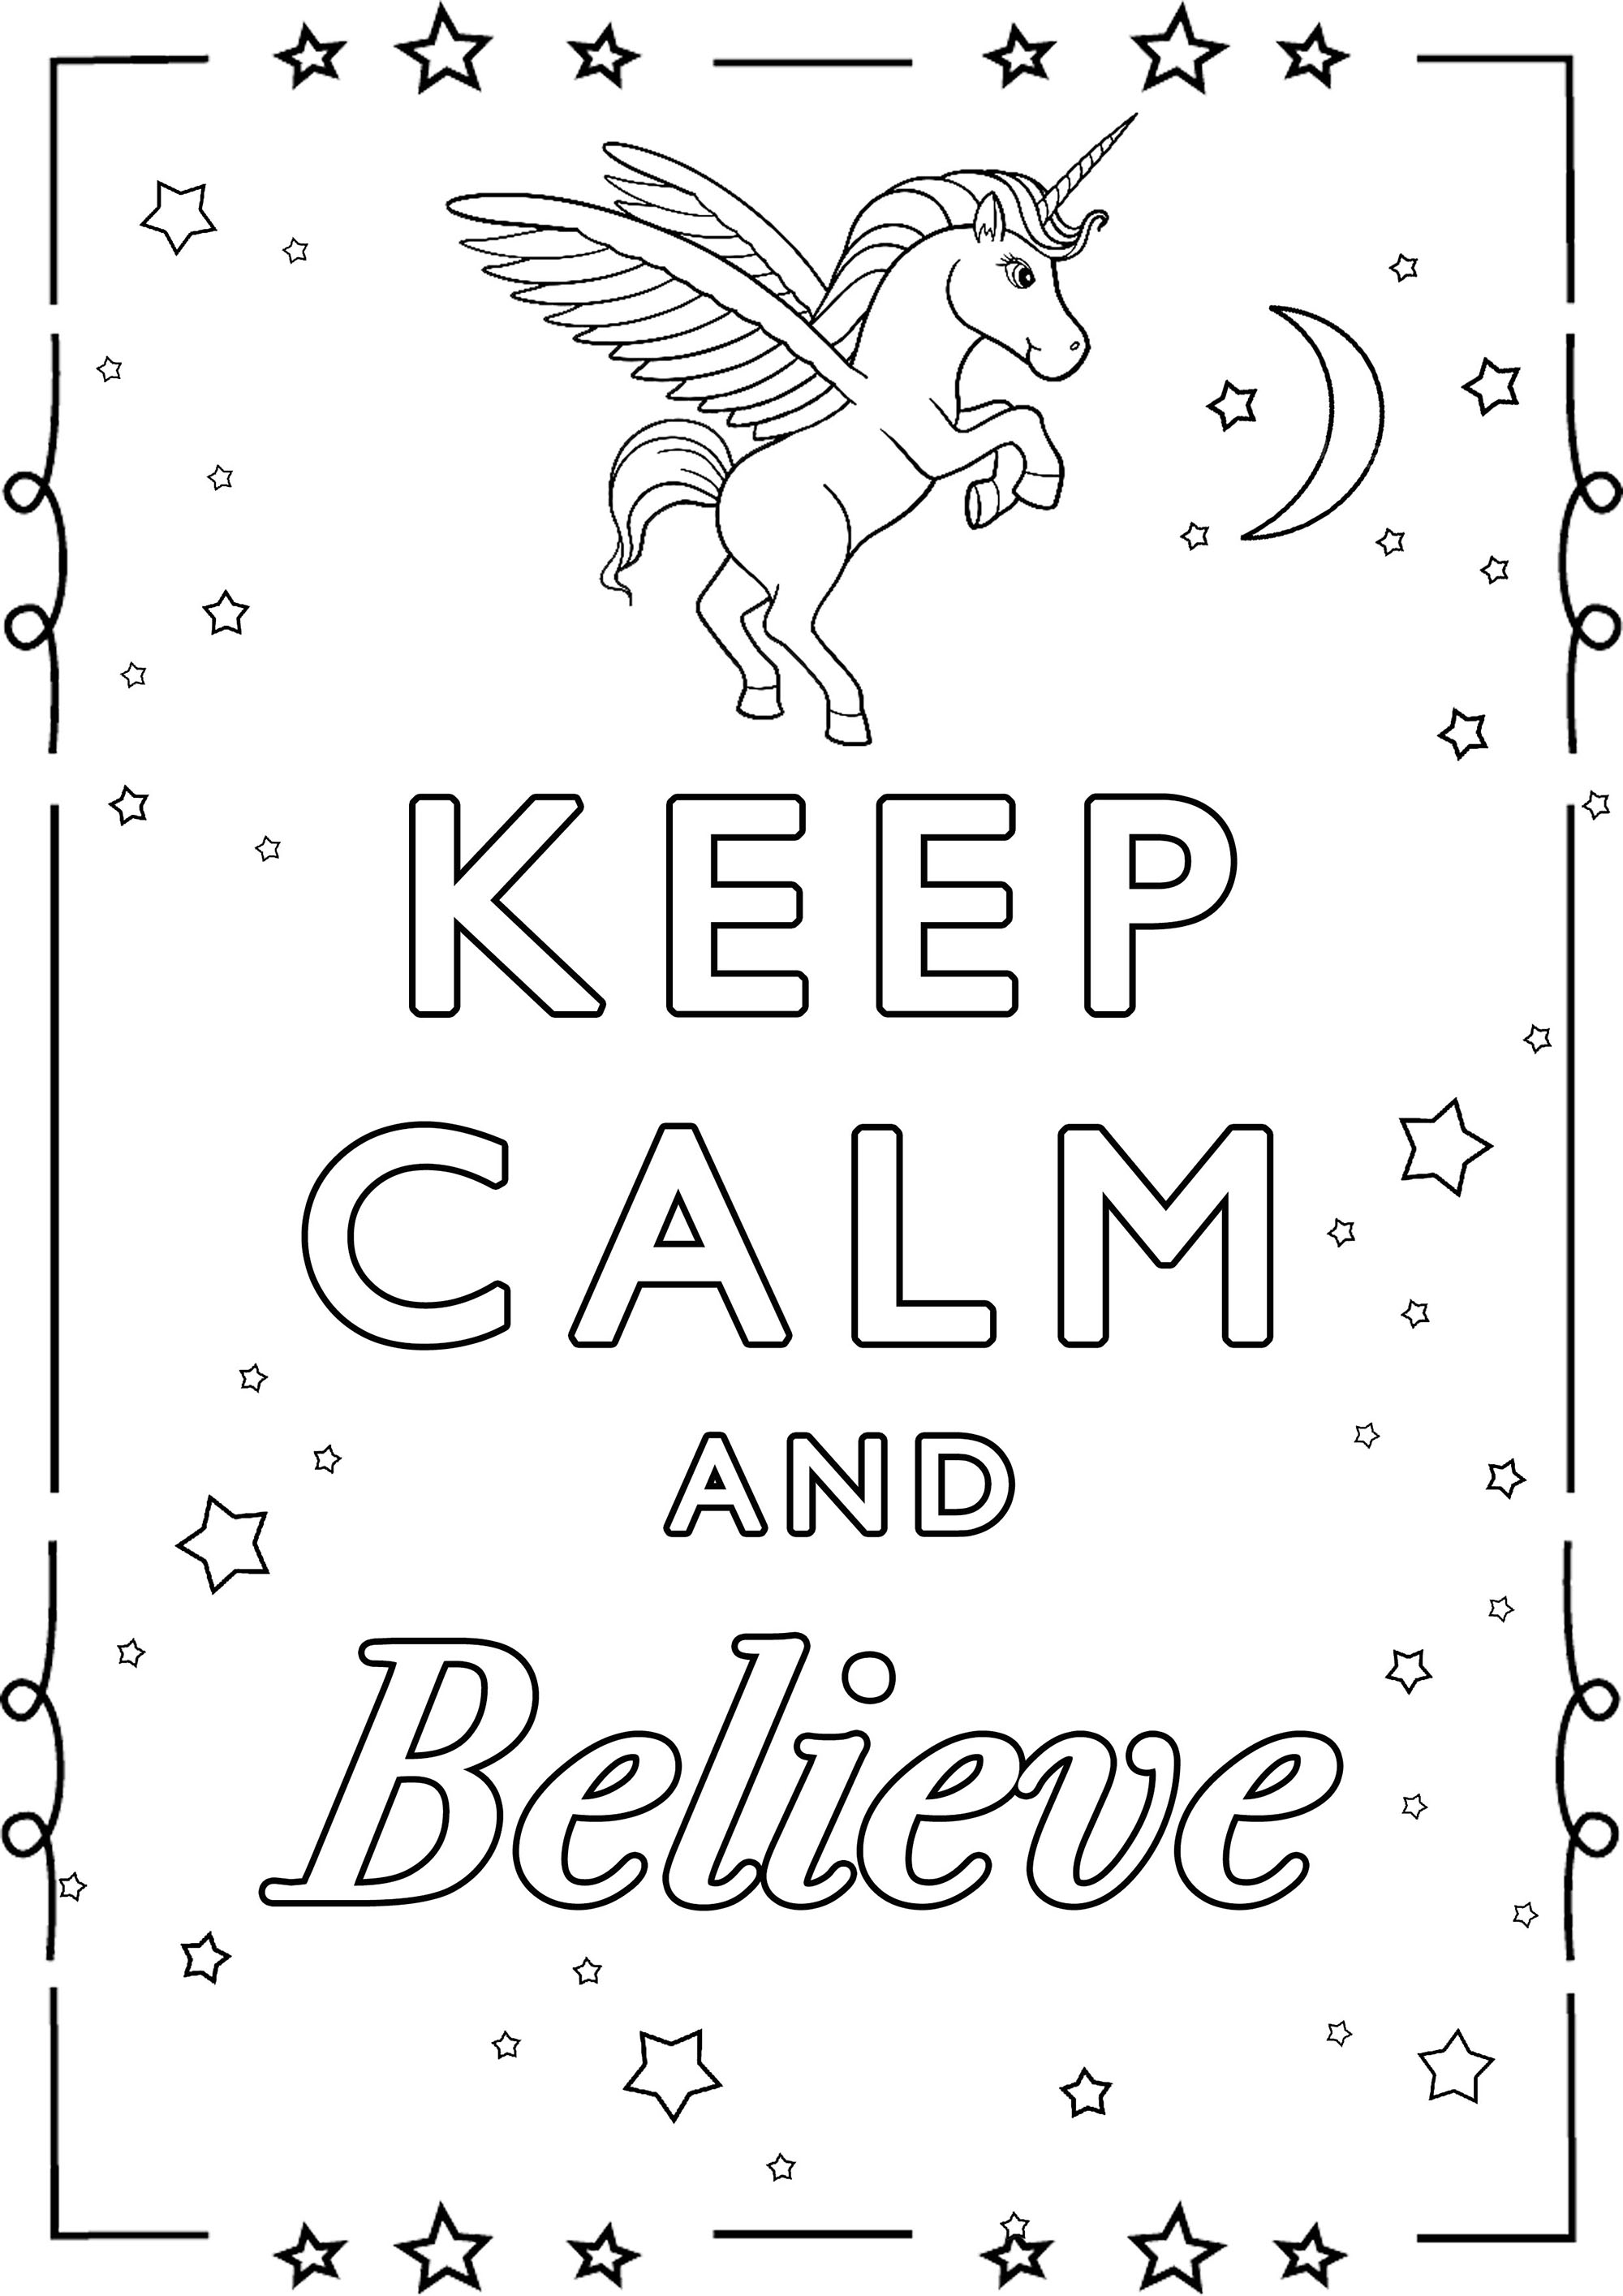 Keep Calm and Believe : You must BELIEVE to LIVE !